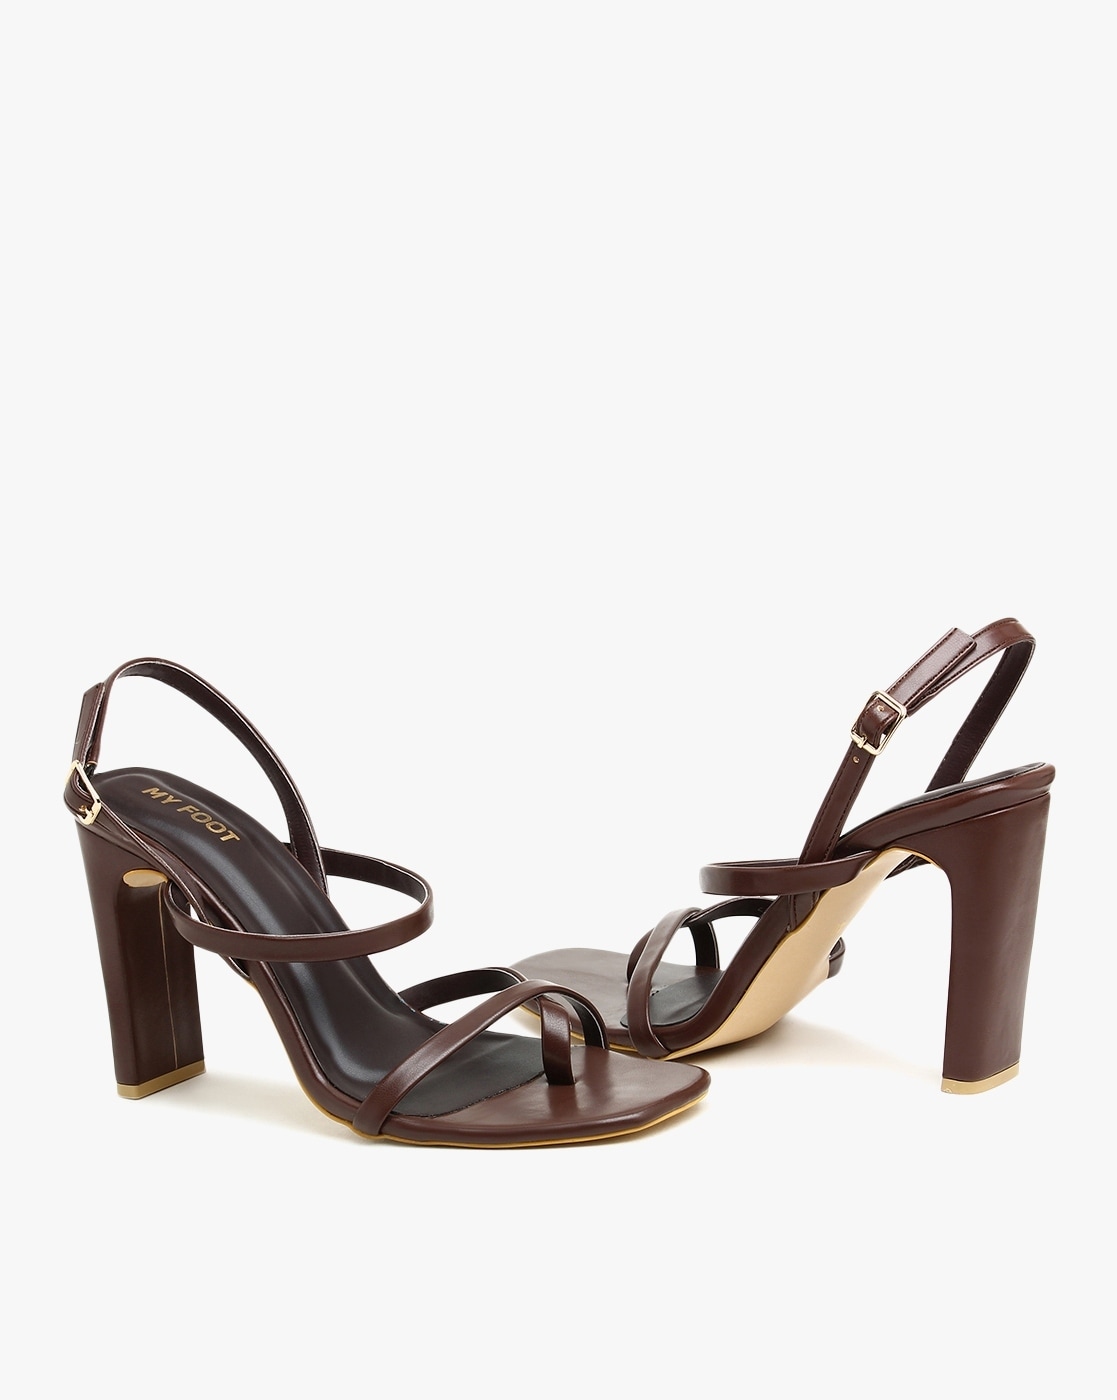 Express Leather Round Toe Strappy Heeled Sandals Brown Women's 9.5 |  Vancouver Mall